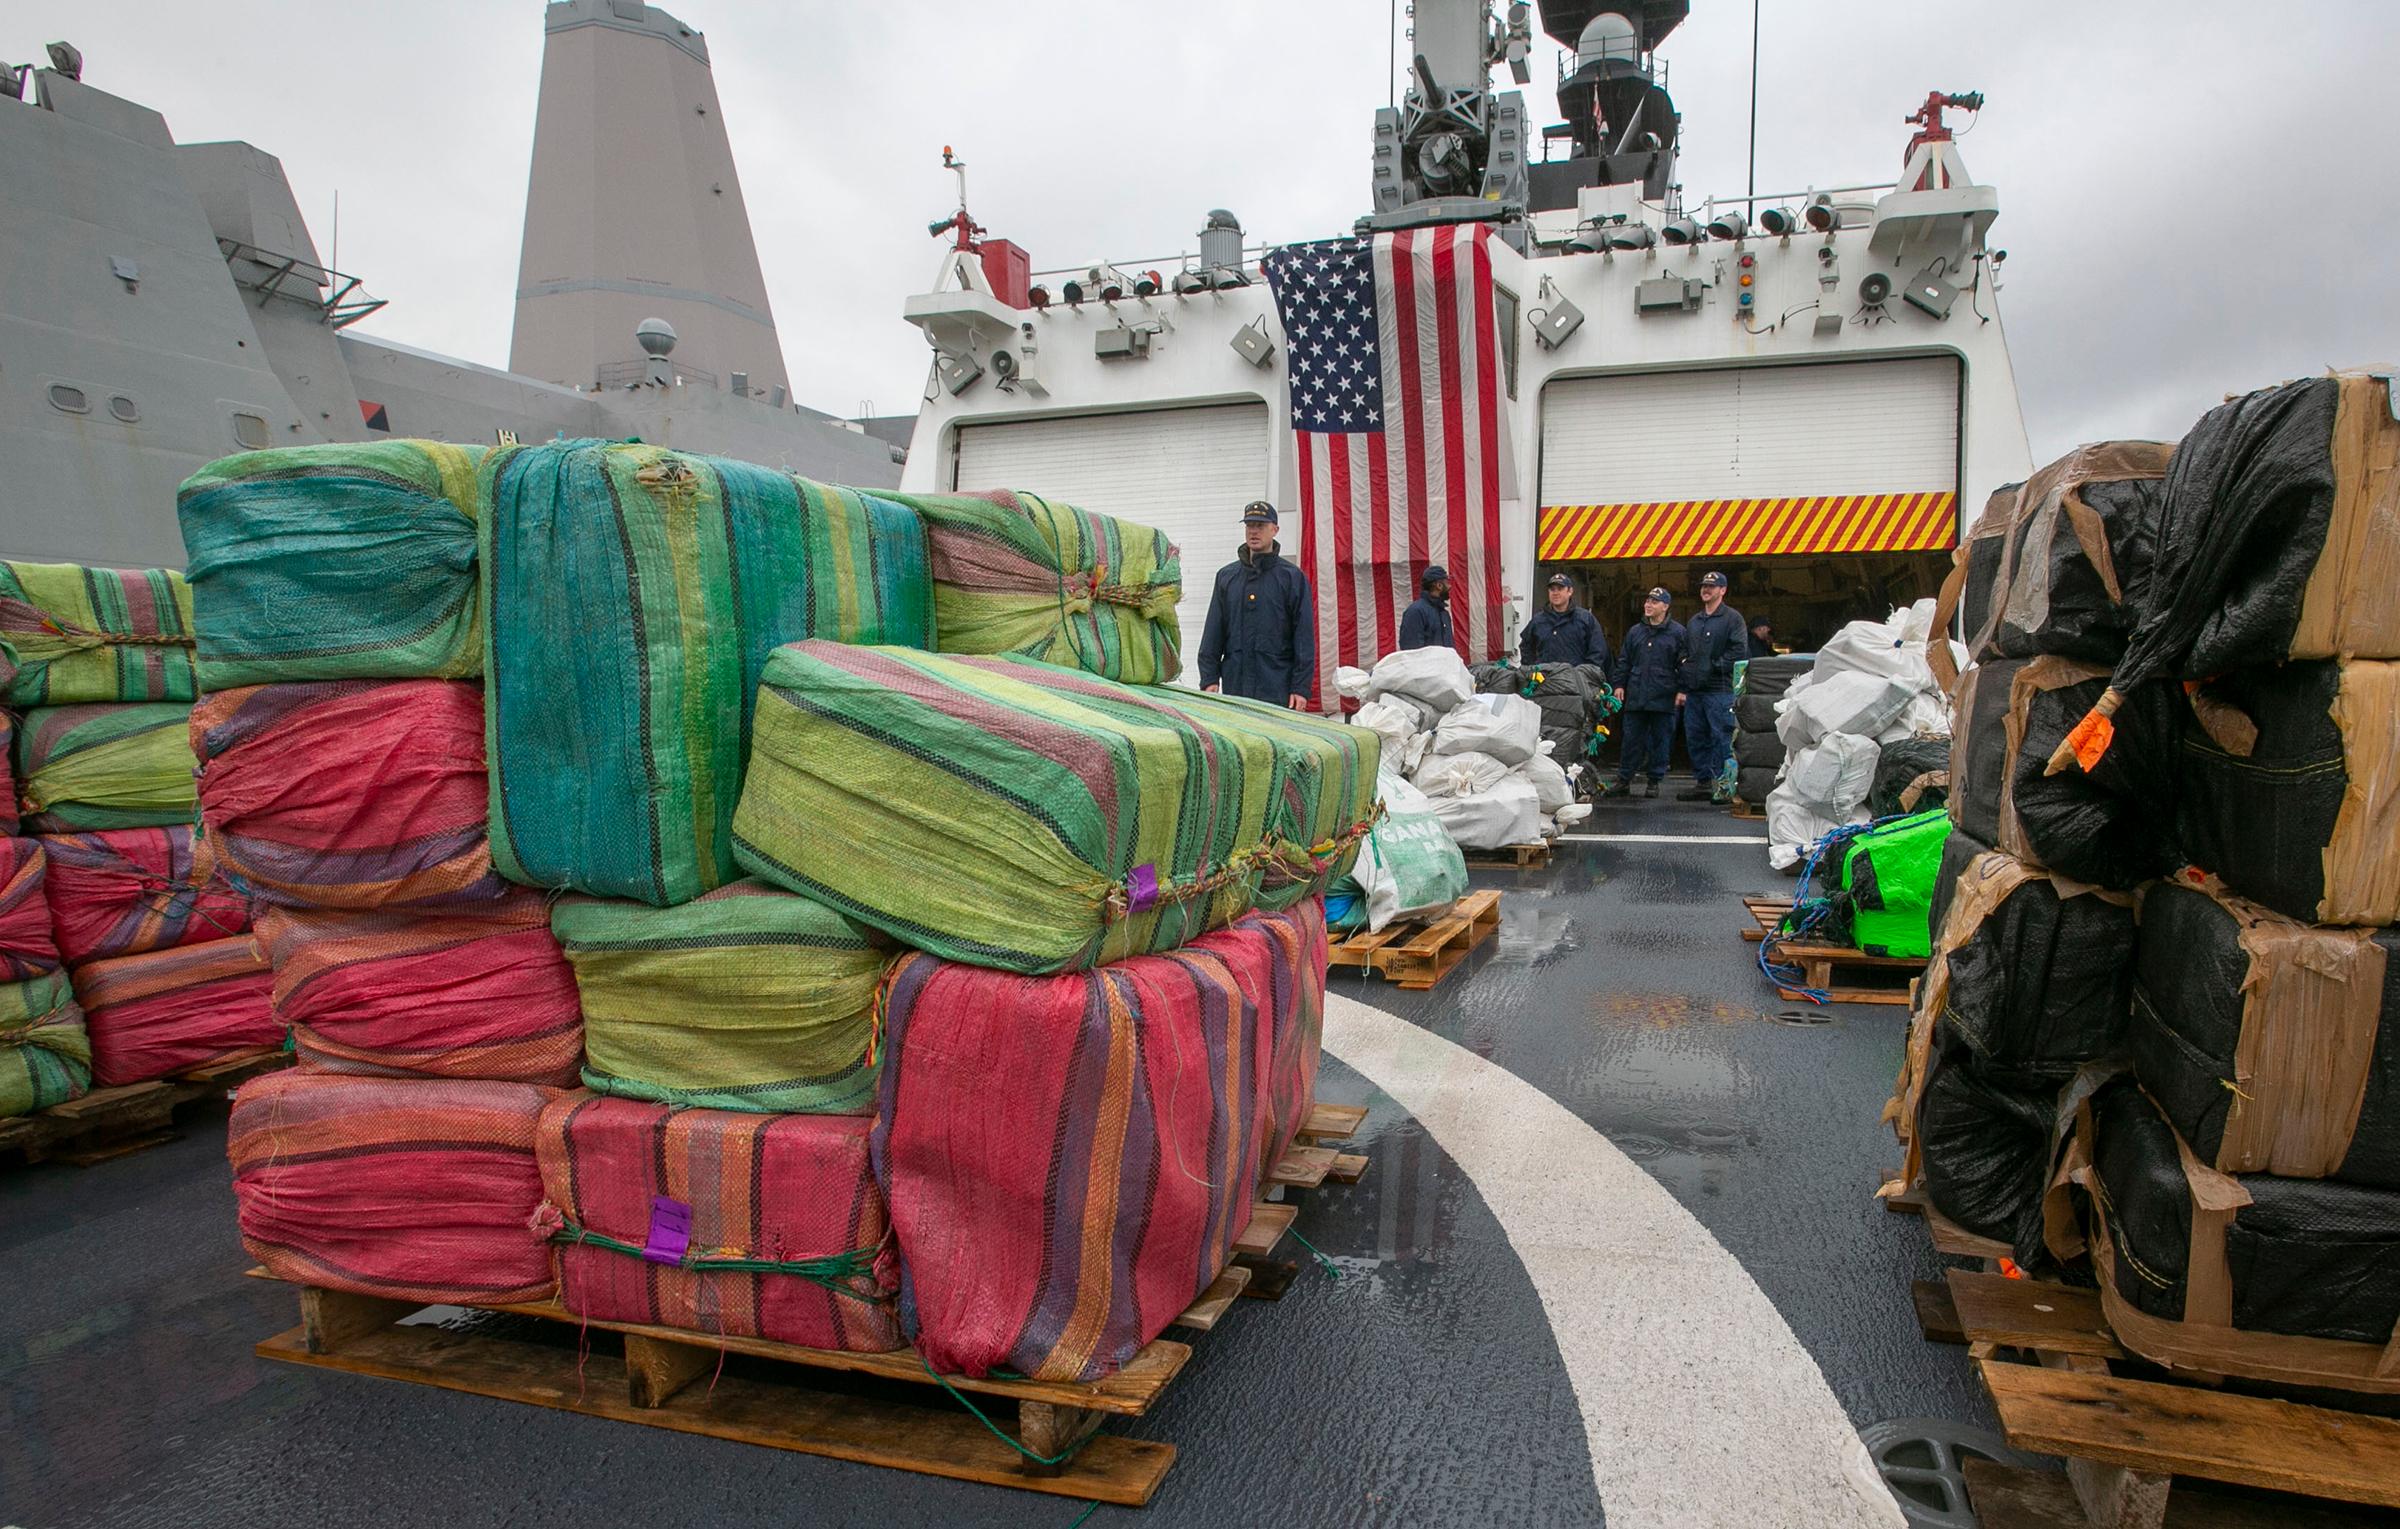 Coast Guard Offloads 33,000 Pounds of Cocaine Worth $468 Million in San Diego